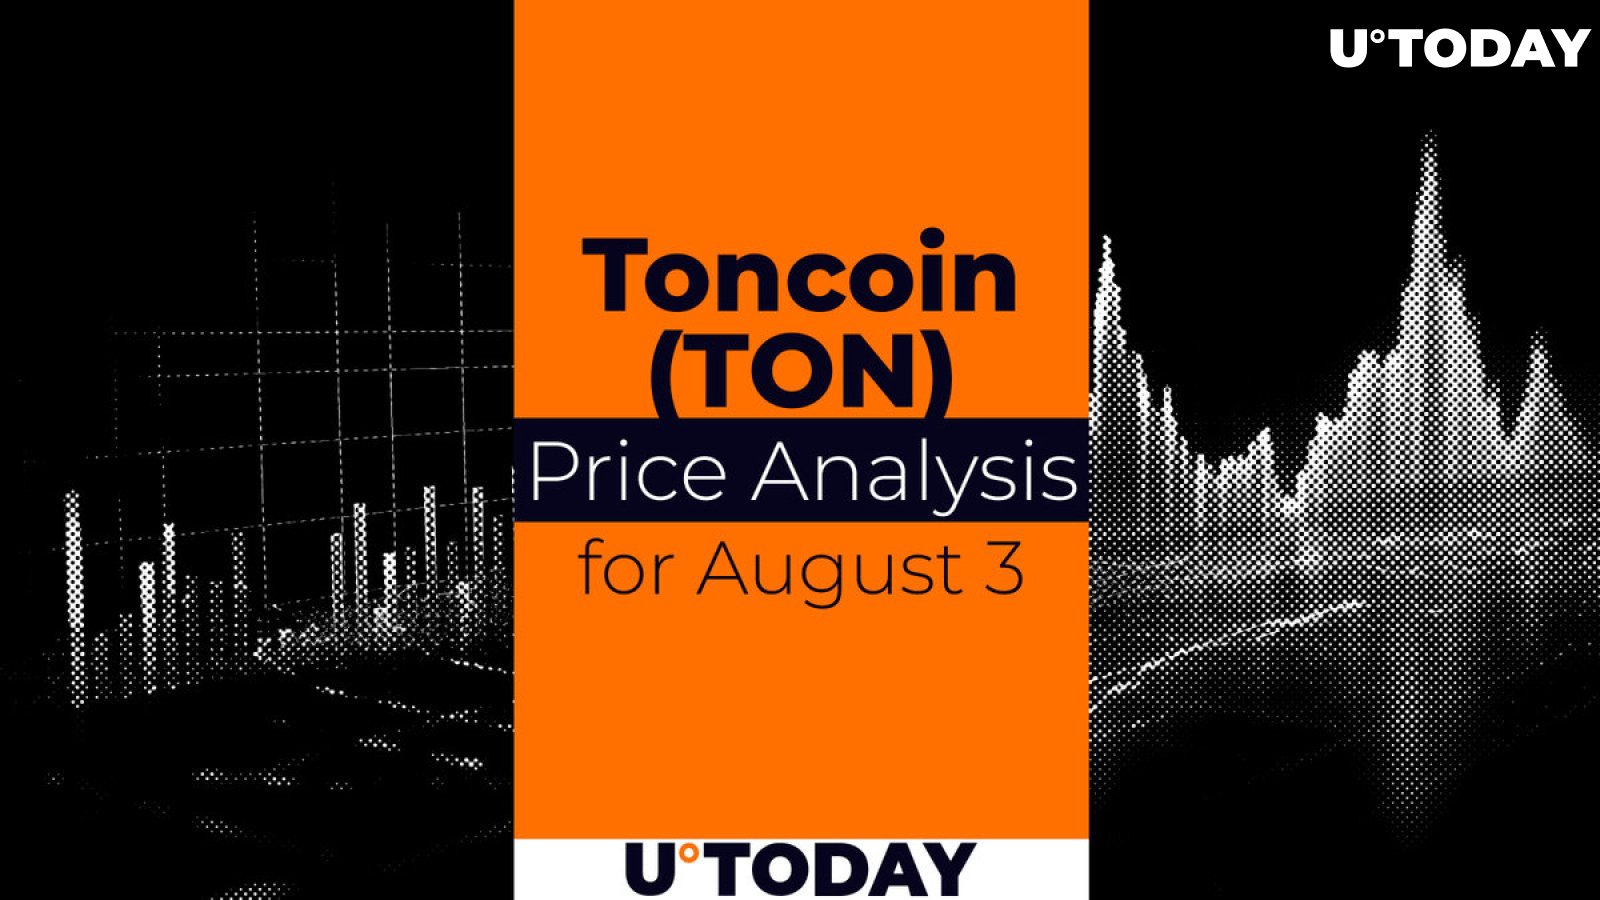 Toncoin (TON) Prediction for August 3